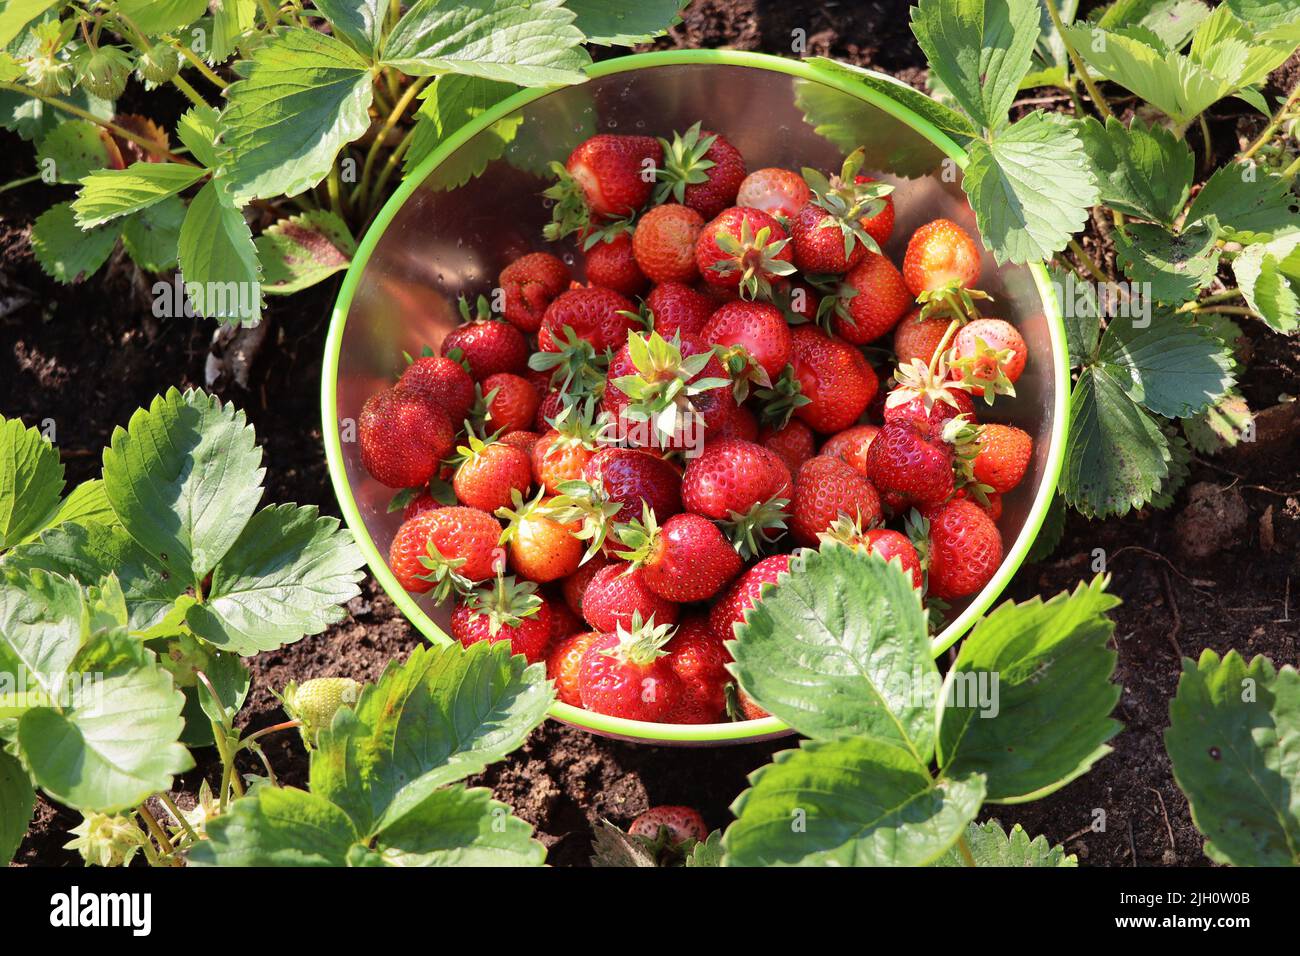 Picking fruits on strawberry field, Harvesting on strawberry farm, strawberry crop. Agriculture and ecological fruit farming concept Stock Photo